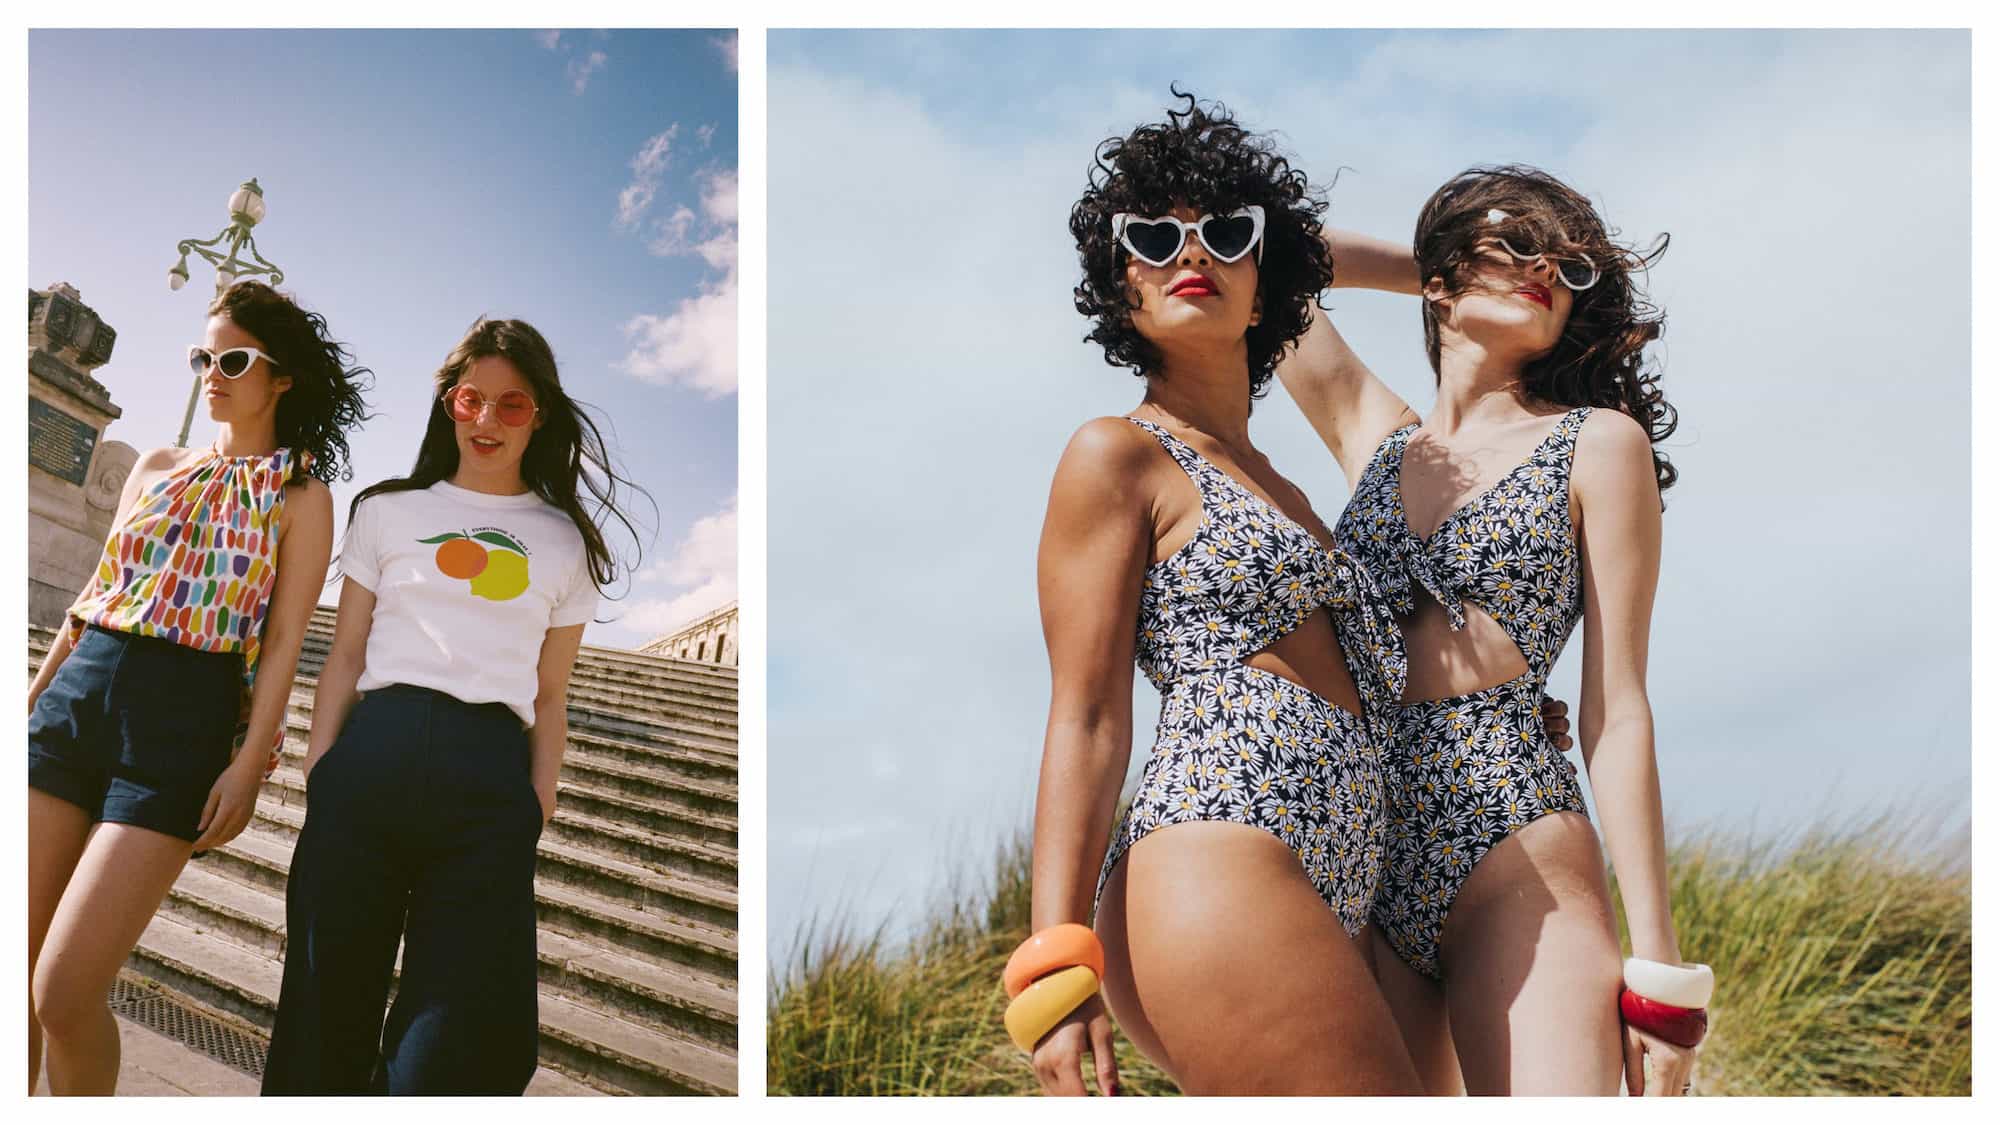 Dressing like a parisienne is about style, like these two girls standing on stone steps, wearing navu shorts and trousers matched with the perfect pair of retro sunglasses (left). Parisian summer style is all about retro sunglasses like these white-rimmed heart-shaped ones and vintage flower bathing suits (right) from Parisian brand Make My Lemonade.